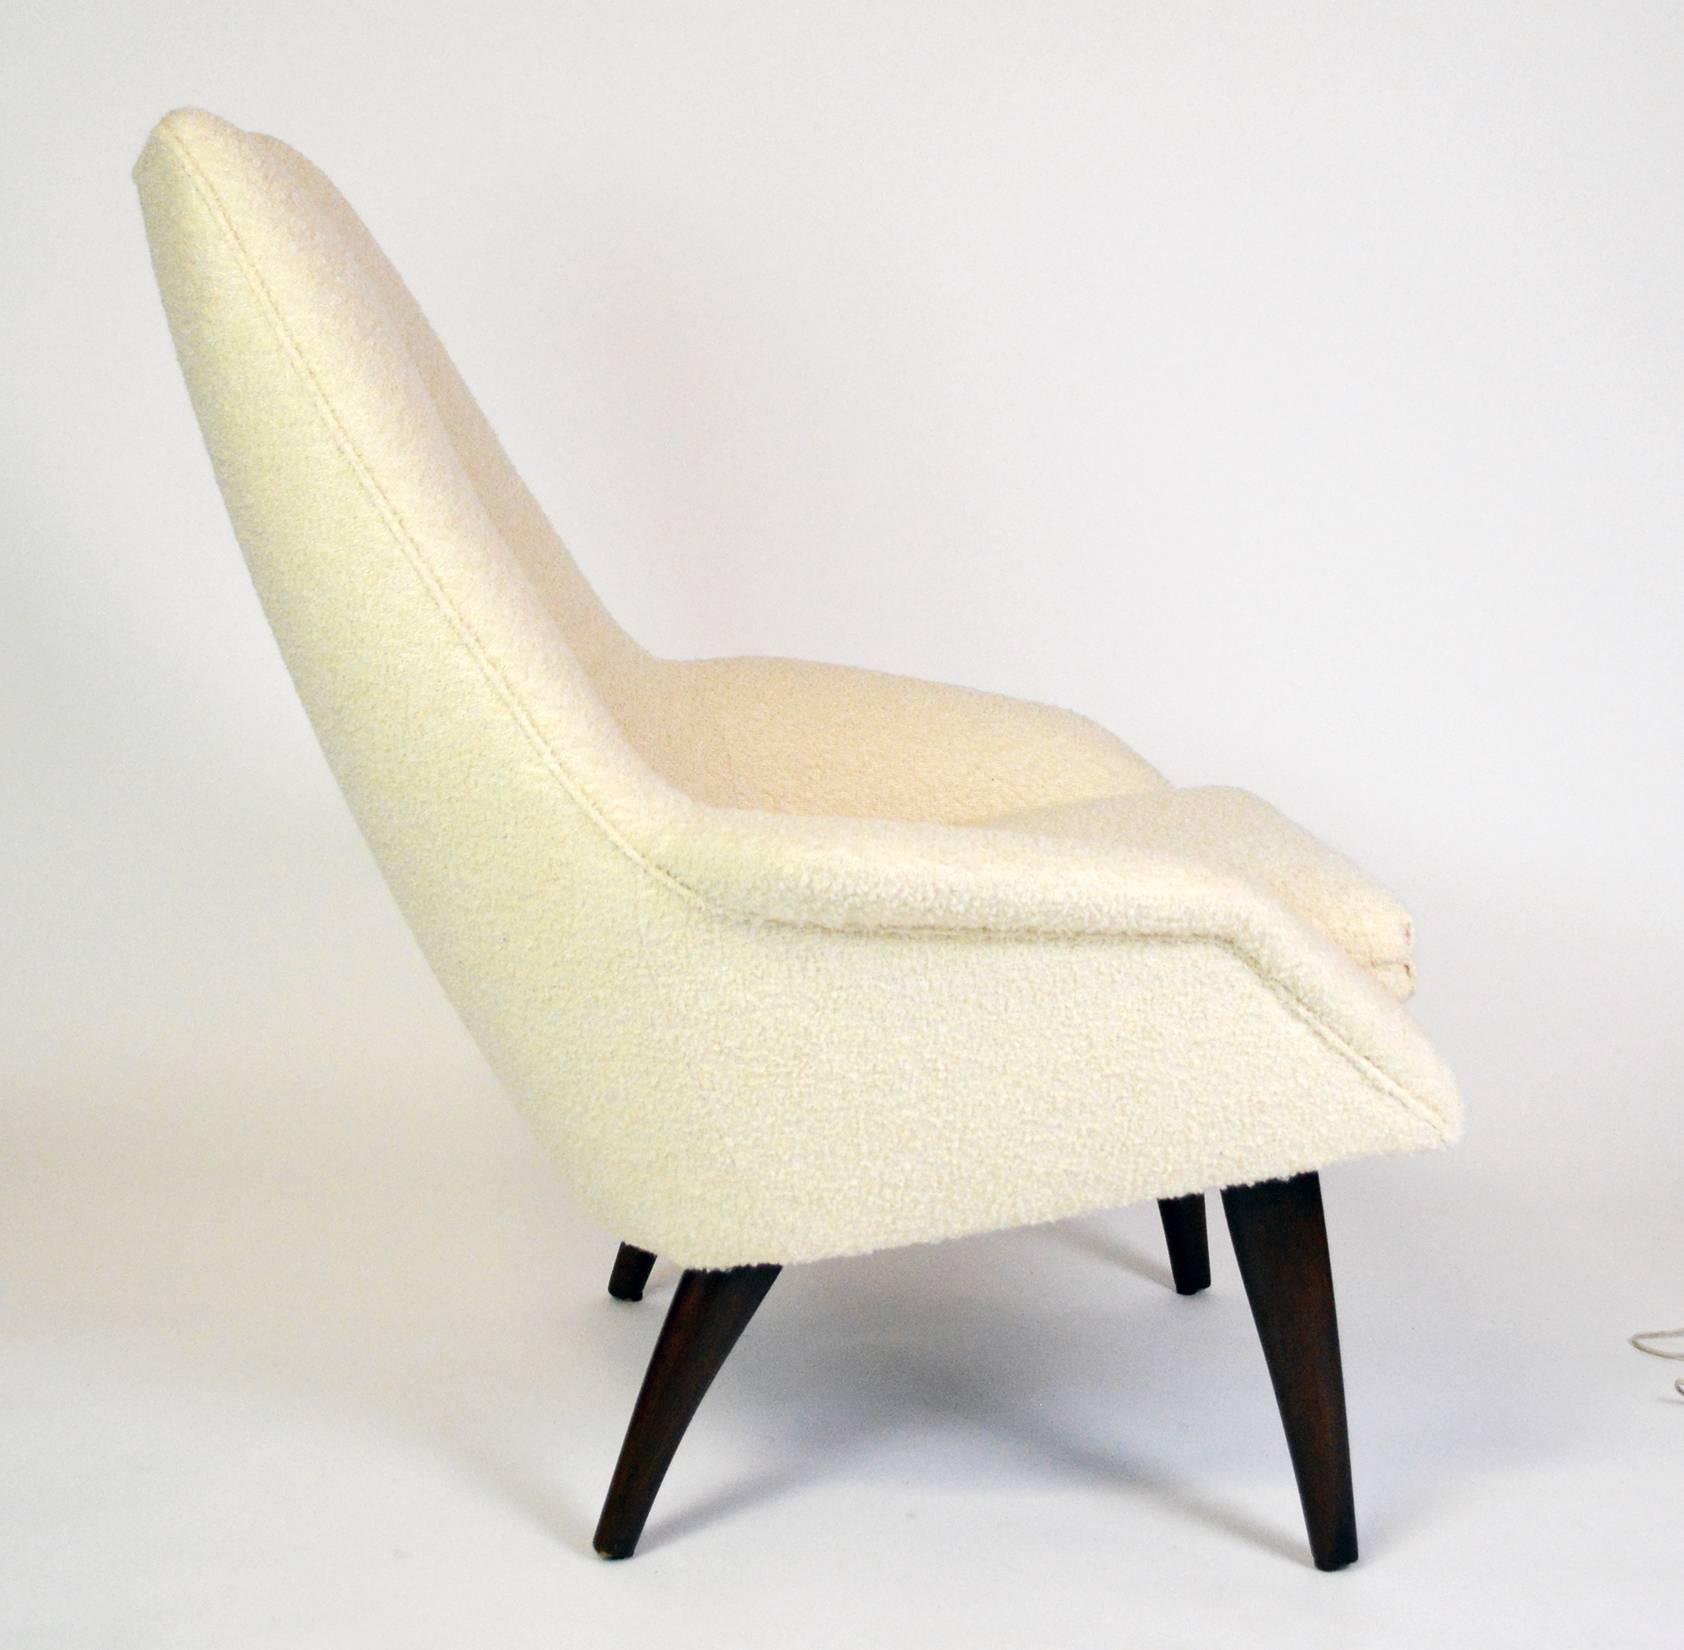 A sculptural Danish lounge chair with a loose seat cushion and tufted back, on curved, tapered walnut legs. Arm height 20" at front,
seat height 18"
seat depth, 21"
seat width, 19".